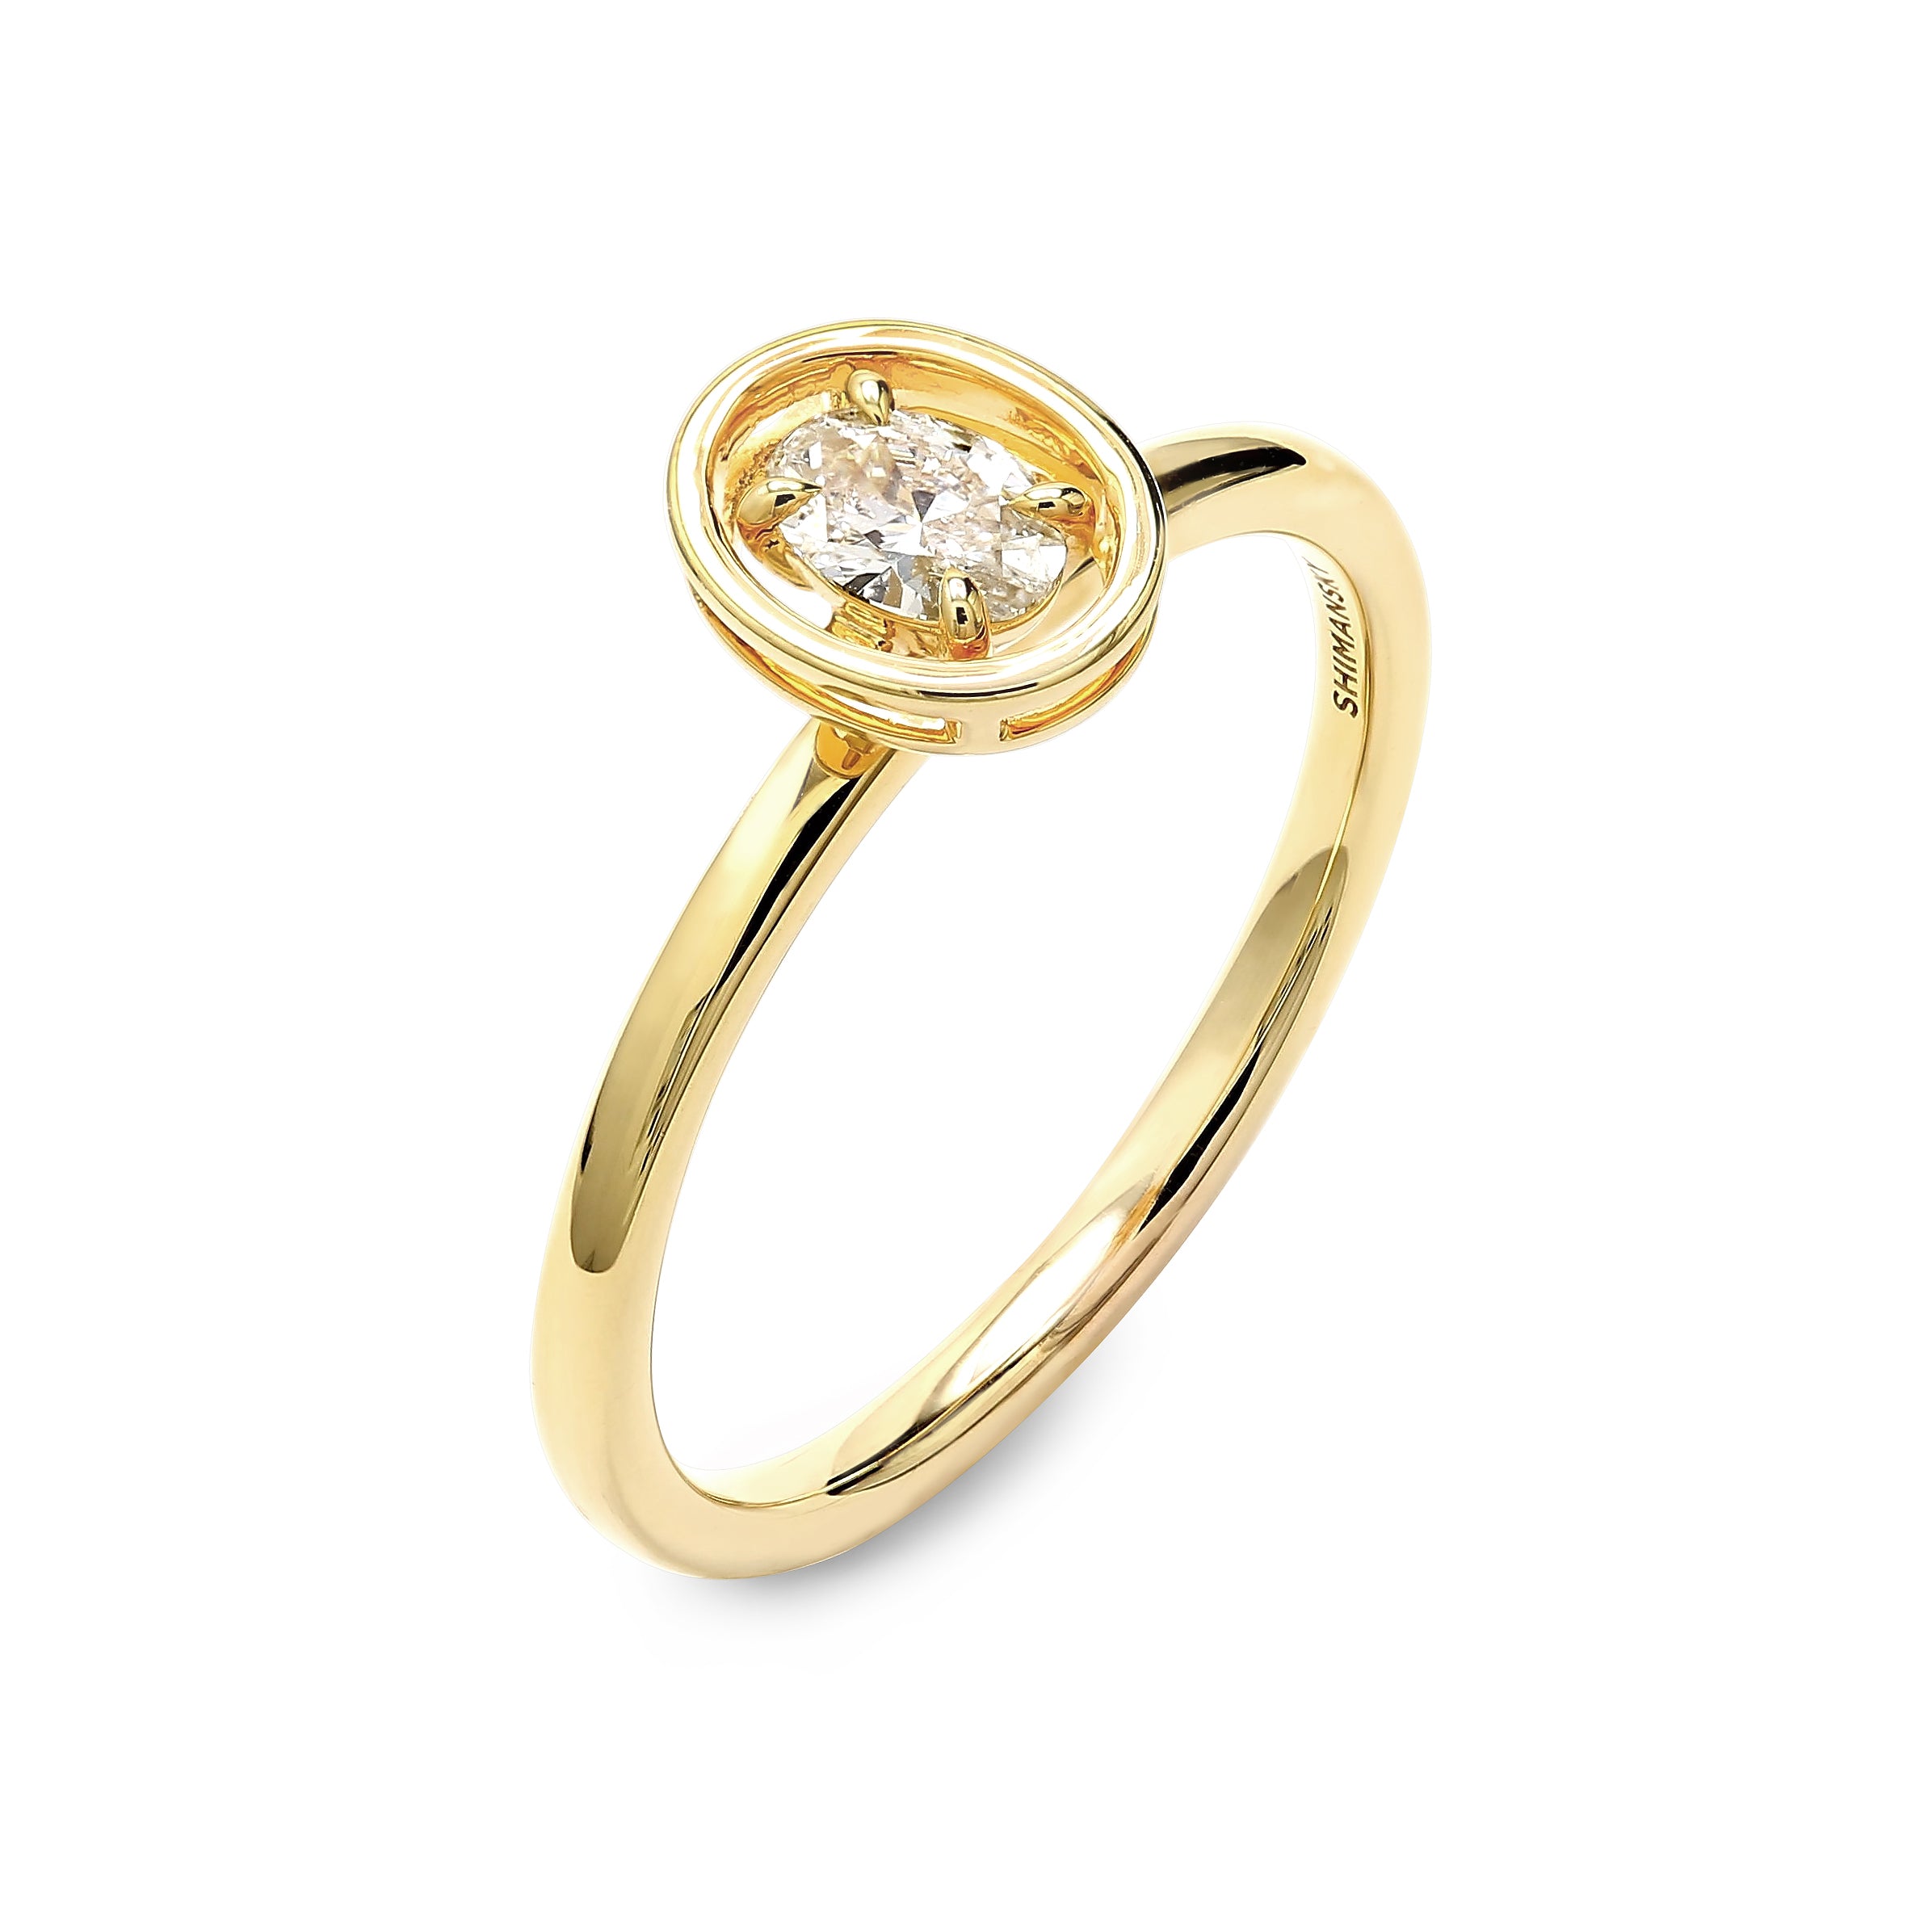 Shimansky - Saturn Oval Diamond Solitaire Ring 0.20ct crafted in 14K Yellow Gold